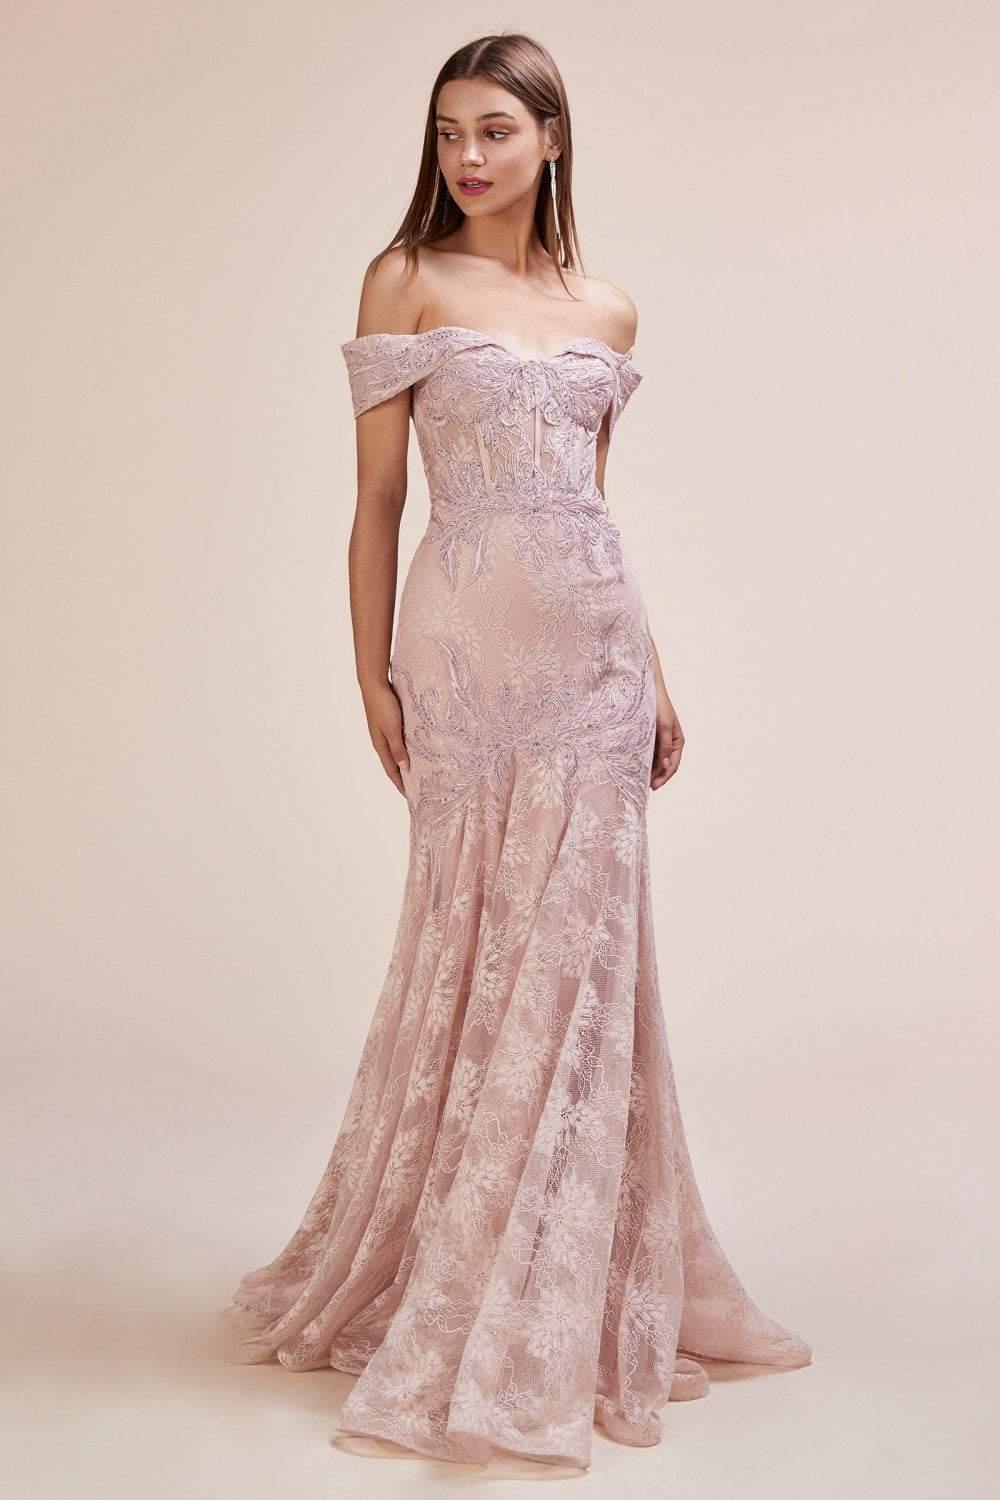 Andrea & Leo CDA0666 Long Prom Dress Evening Gown Dusty Rose